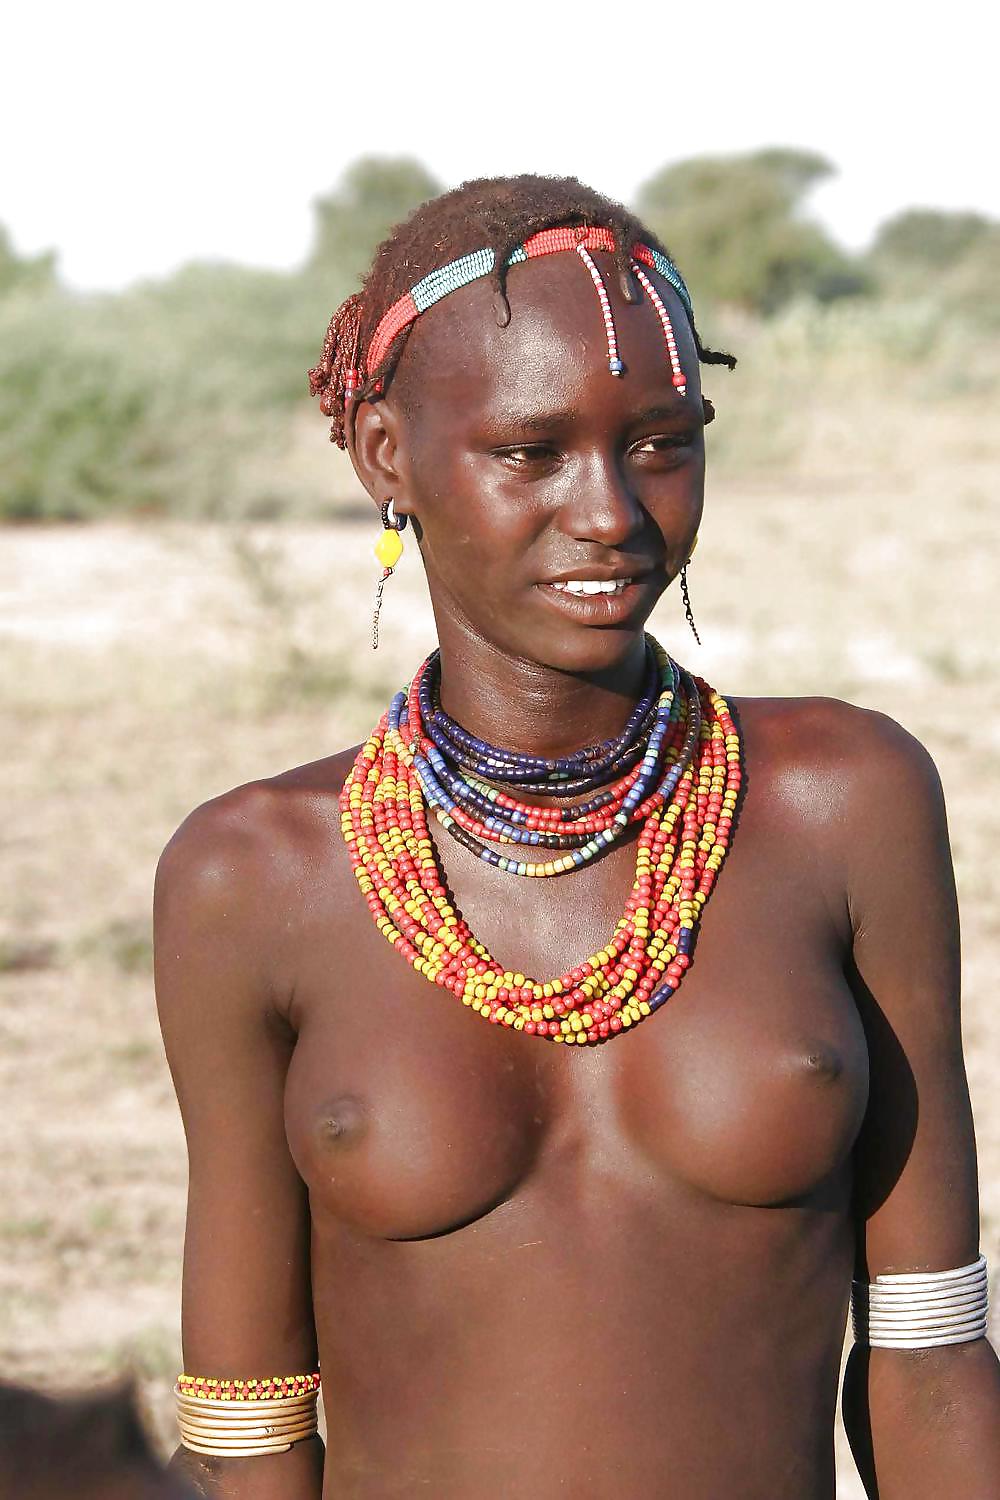 best of Girl pic tribal naked african